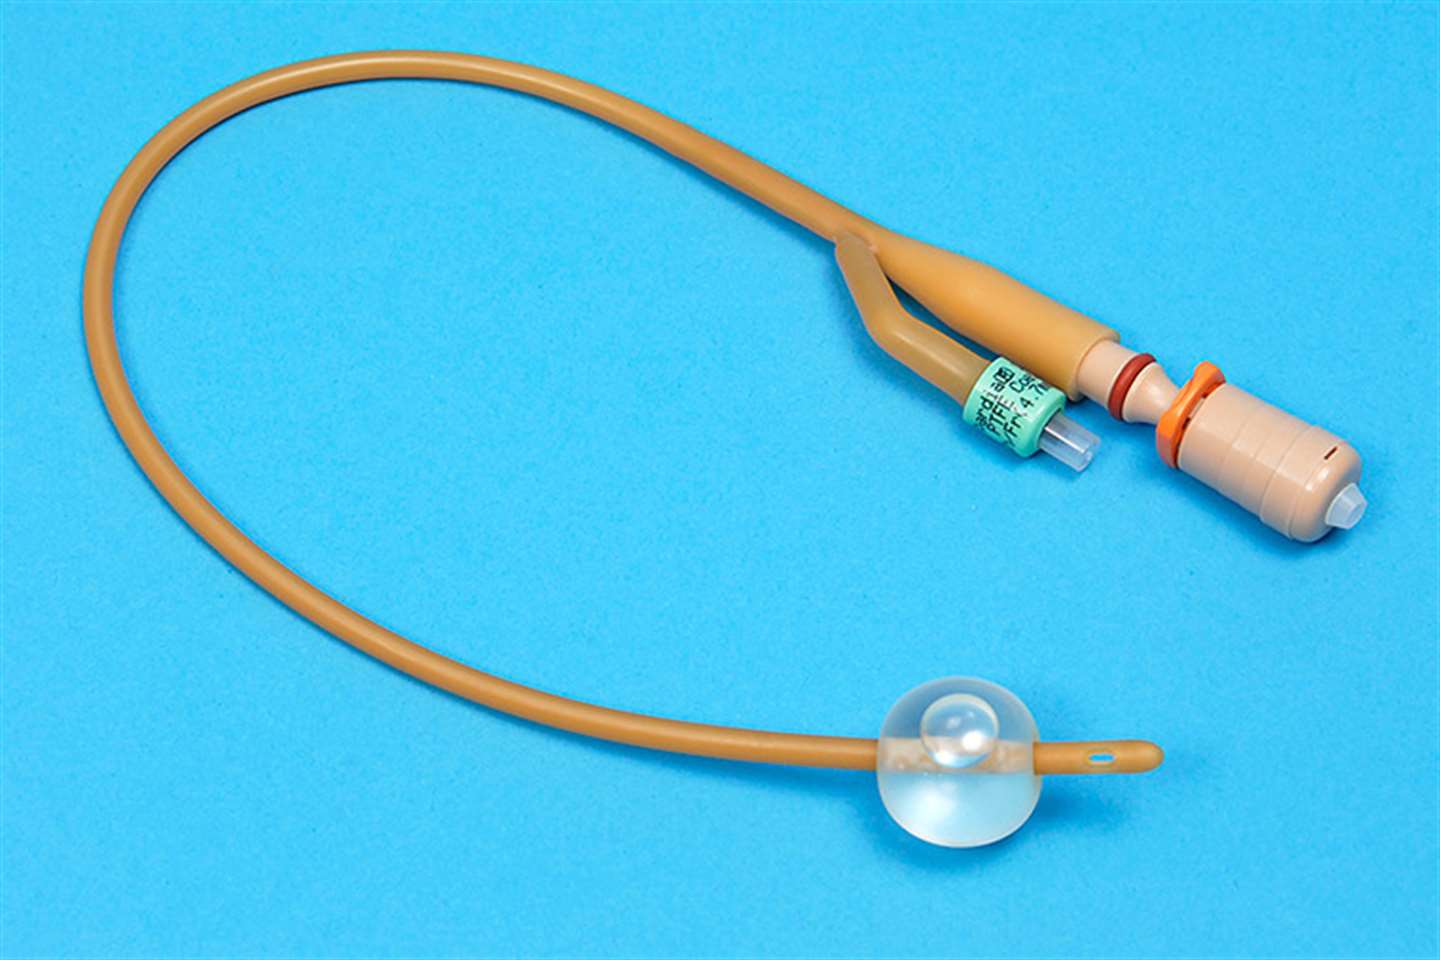 Foley indwelling catheter with a reusable catheter valve attached